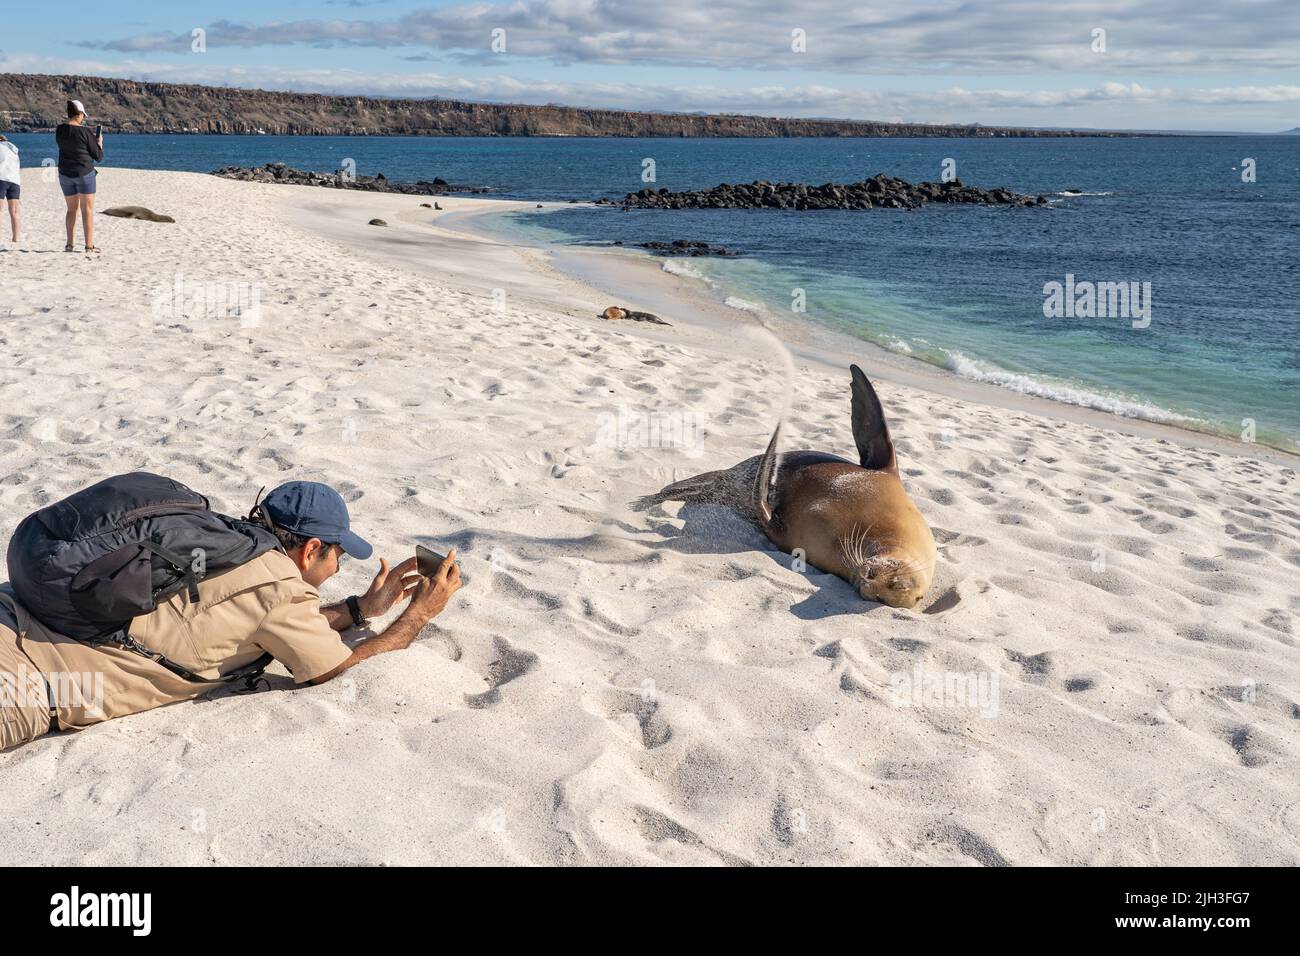 Naturalist guide takes a photo of a sea lion in the Galapagos Islands Stock Photo